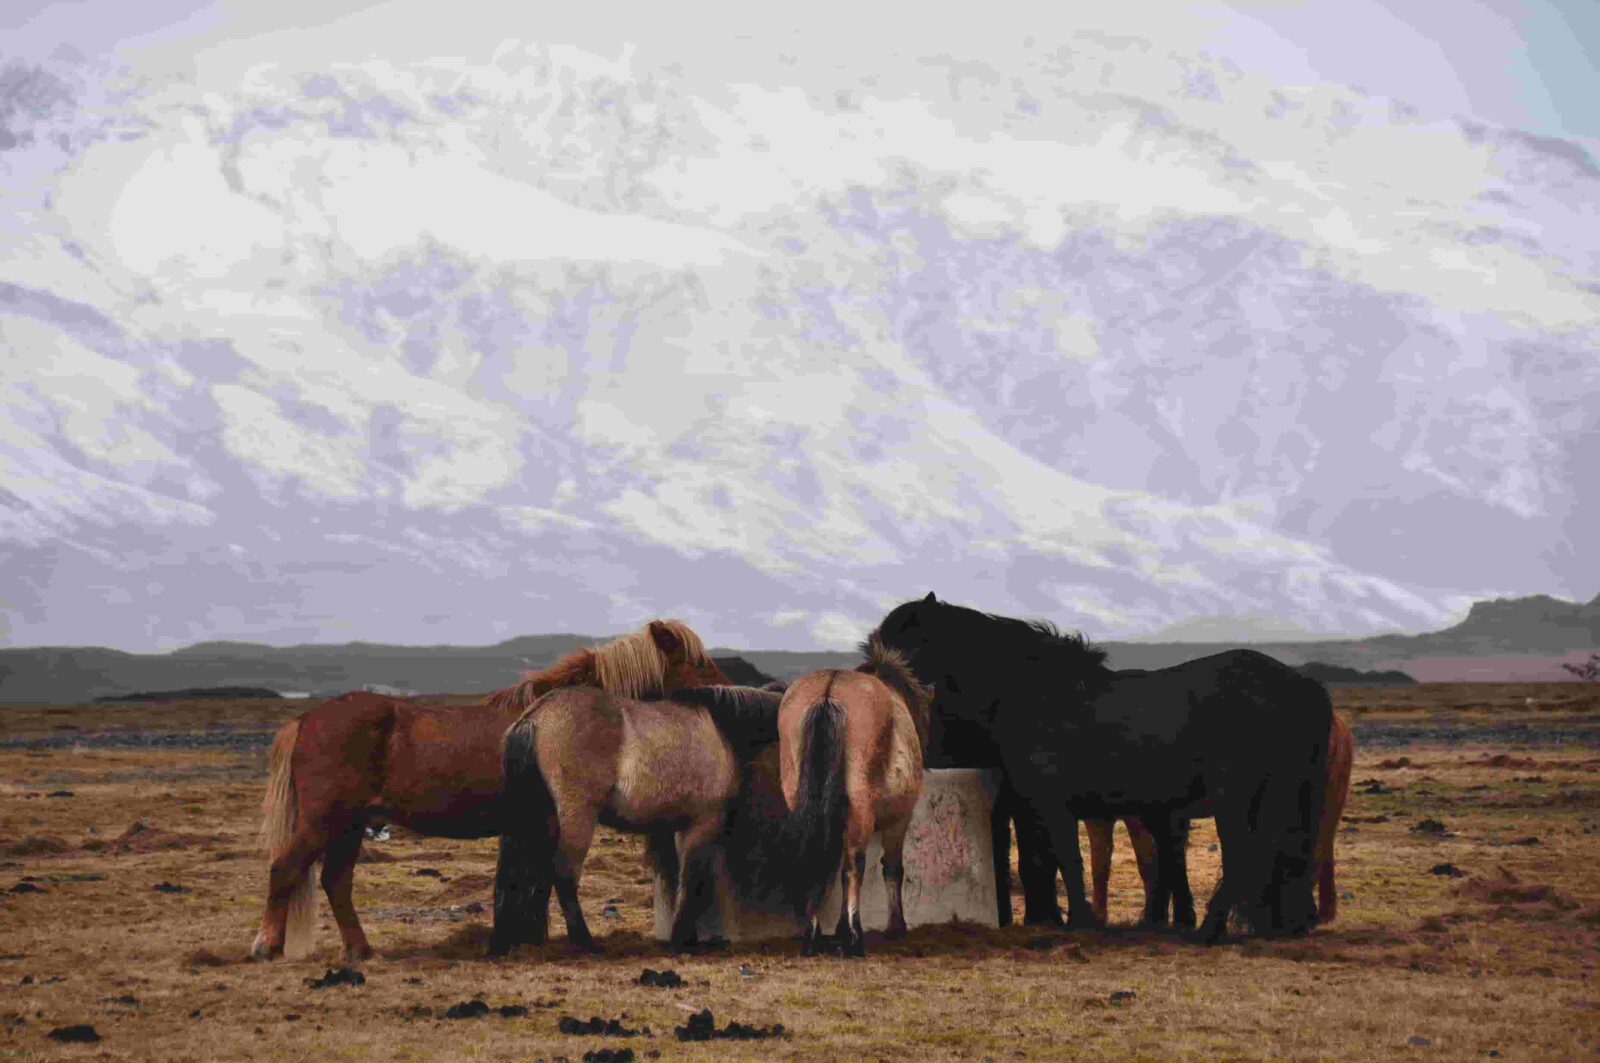 Iceland special horse breed